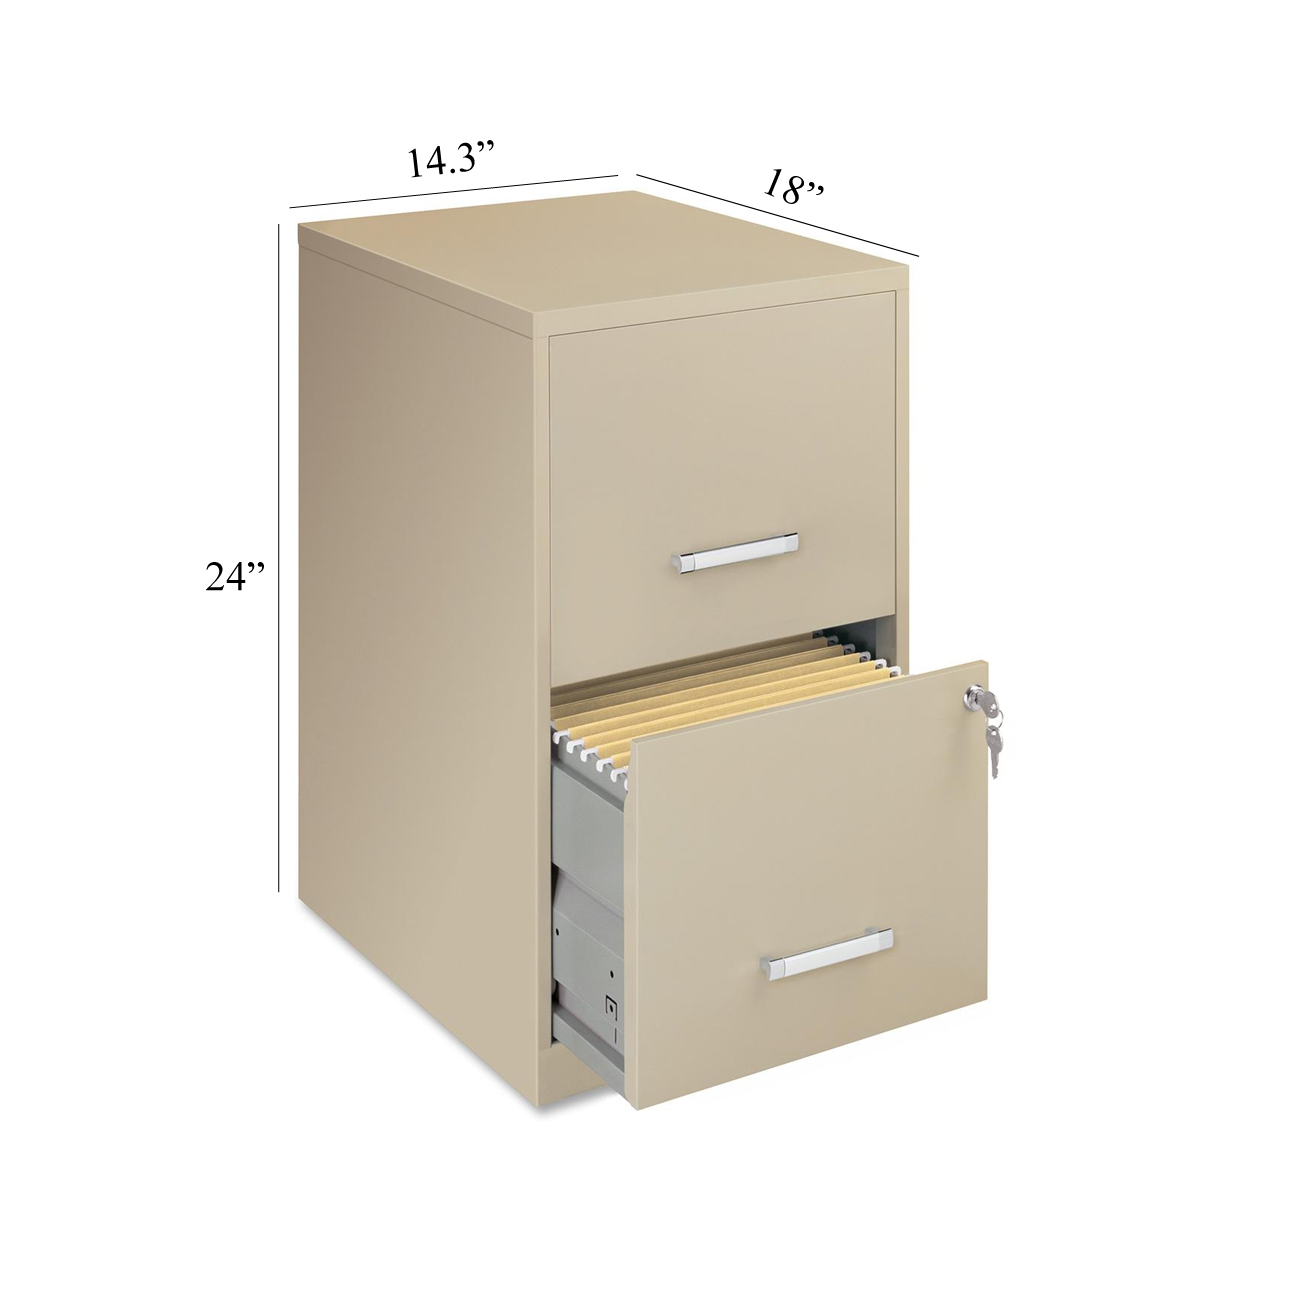 Space Solutions 2 Drawers Vertical Steel Lockable Filing Cabinet, Putty - image 3 of 3